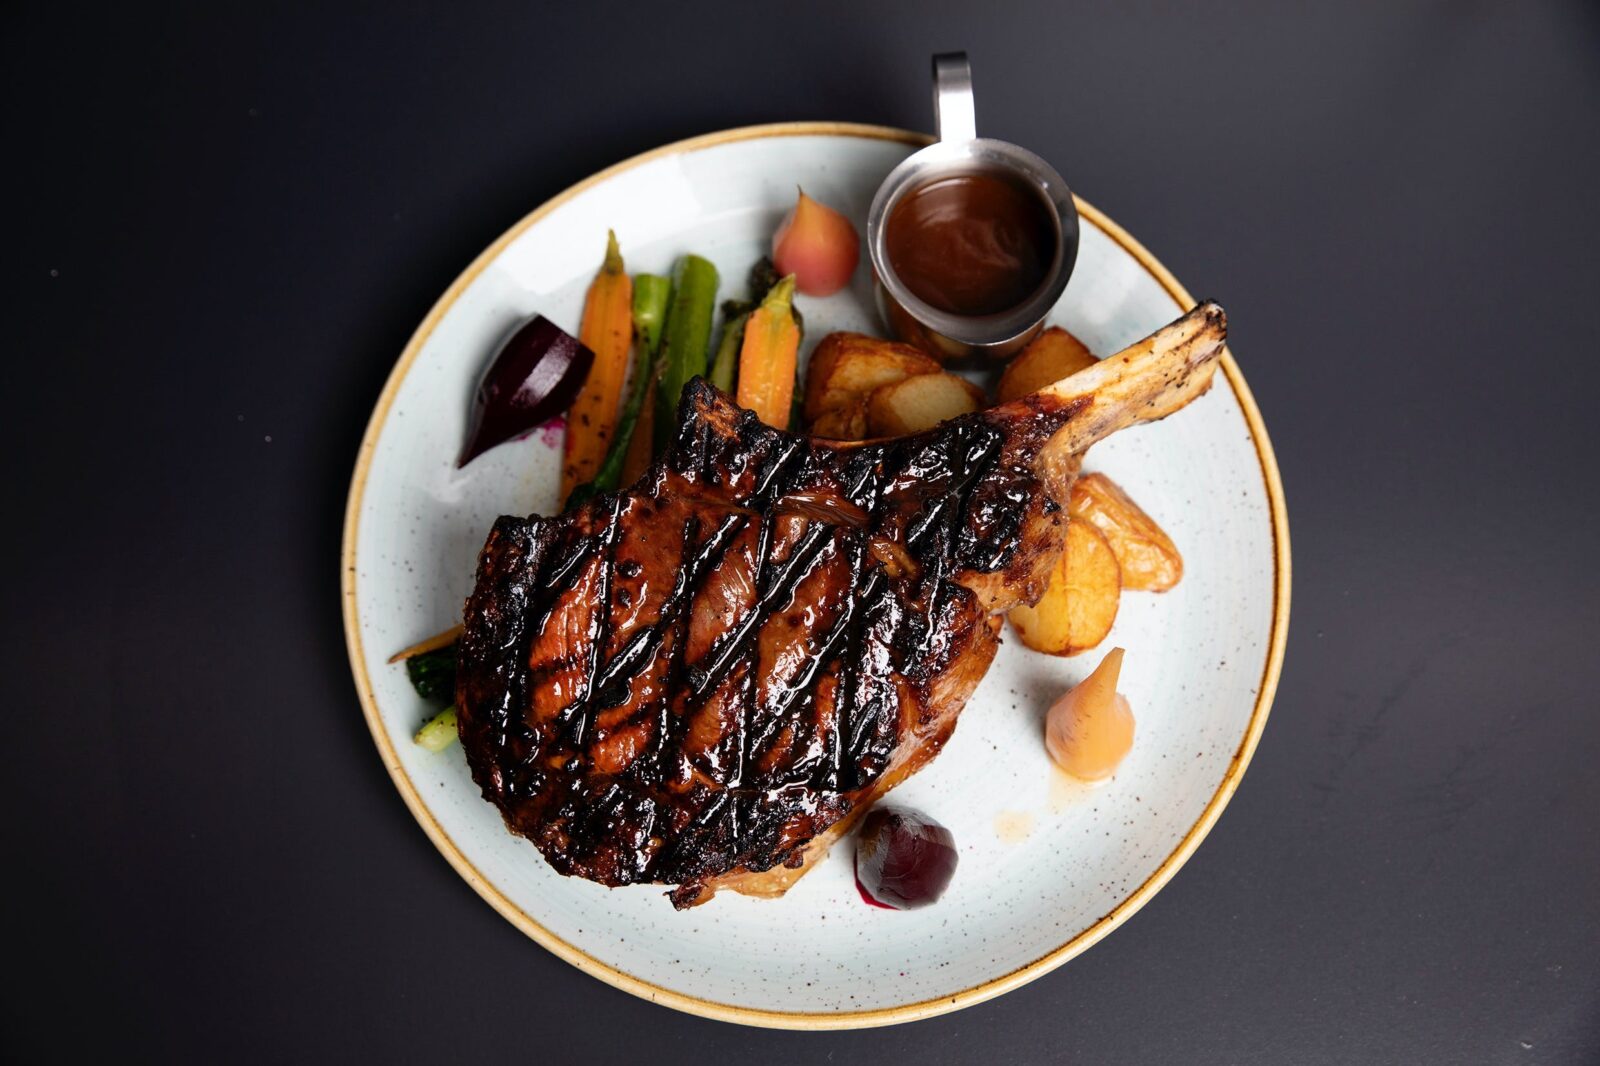 Shaws Rib Eye is grass fed and sourced from their own farm in Boisdale, Victoria